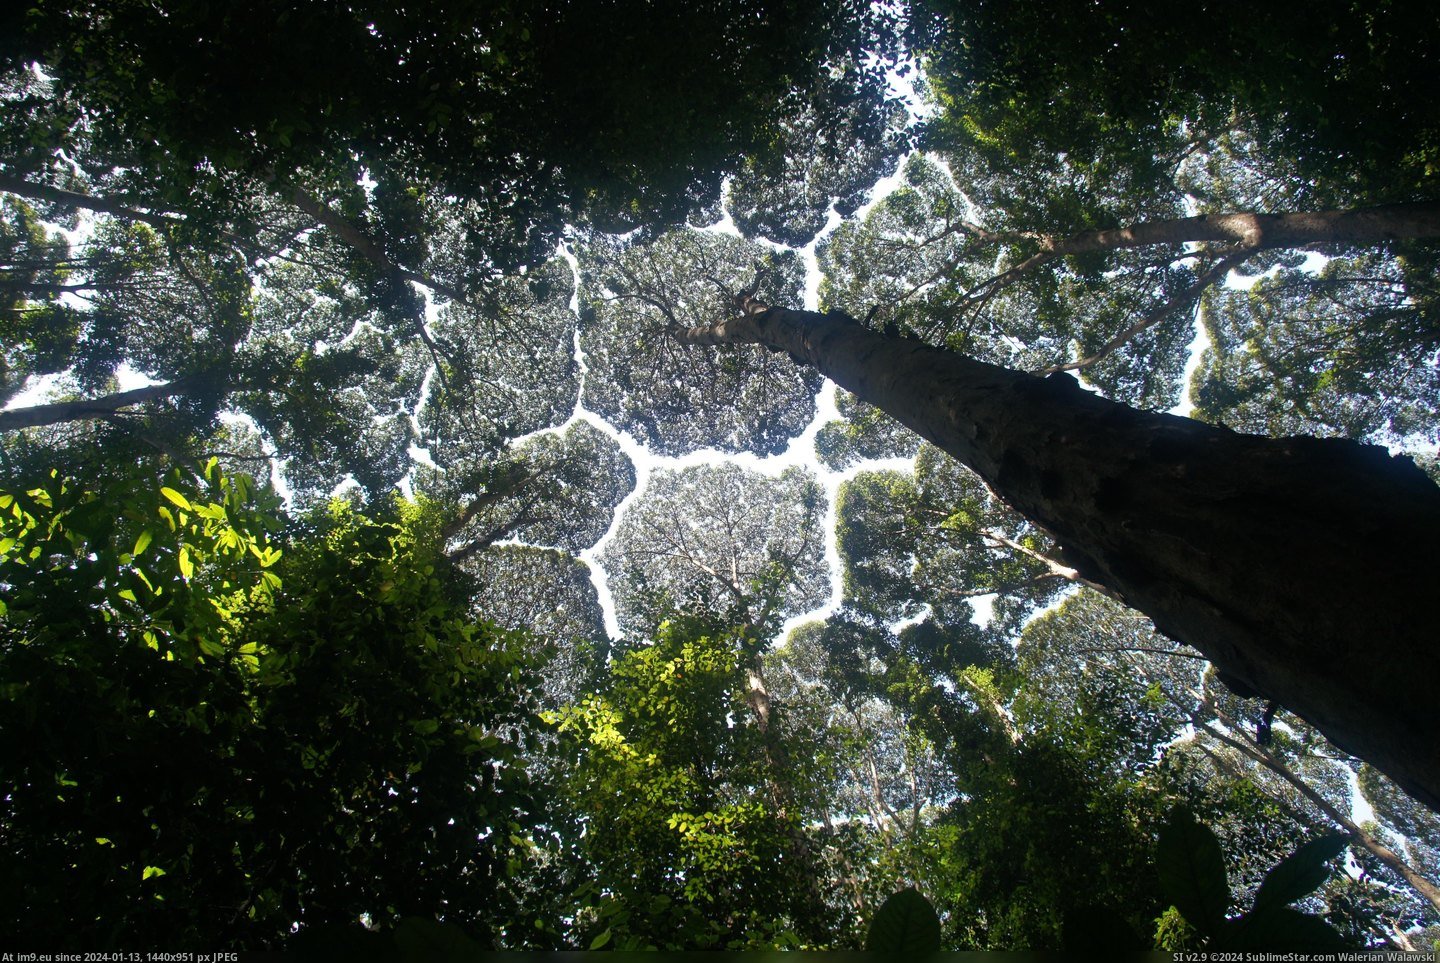 #Natural #Called #Touch #Phenomenon #Shyness #Trees #Crown #Eachother [Pics] The canopies of these trees don't ever touch eachother, it's a natural phenomenon called 'crown shyness'. Pic. (Obraz z album My r/PICS favs))